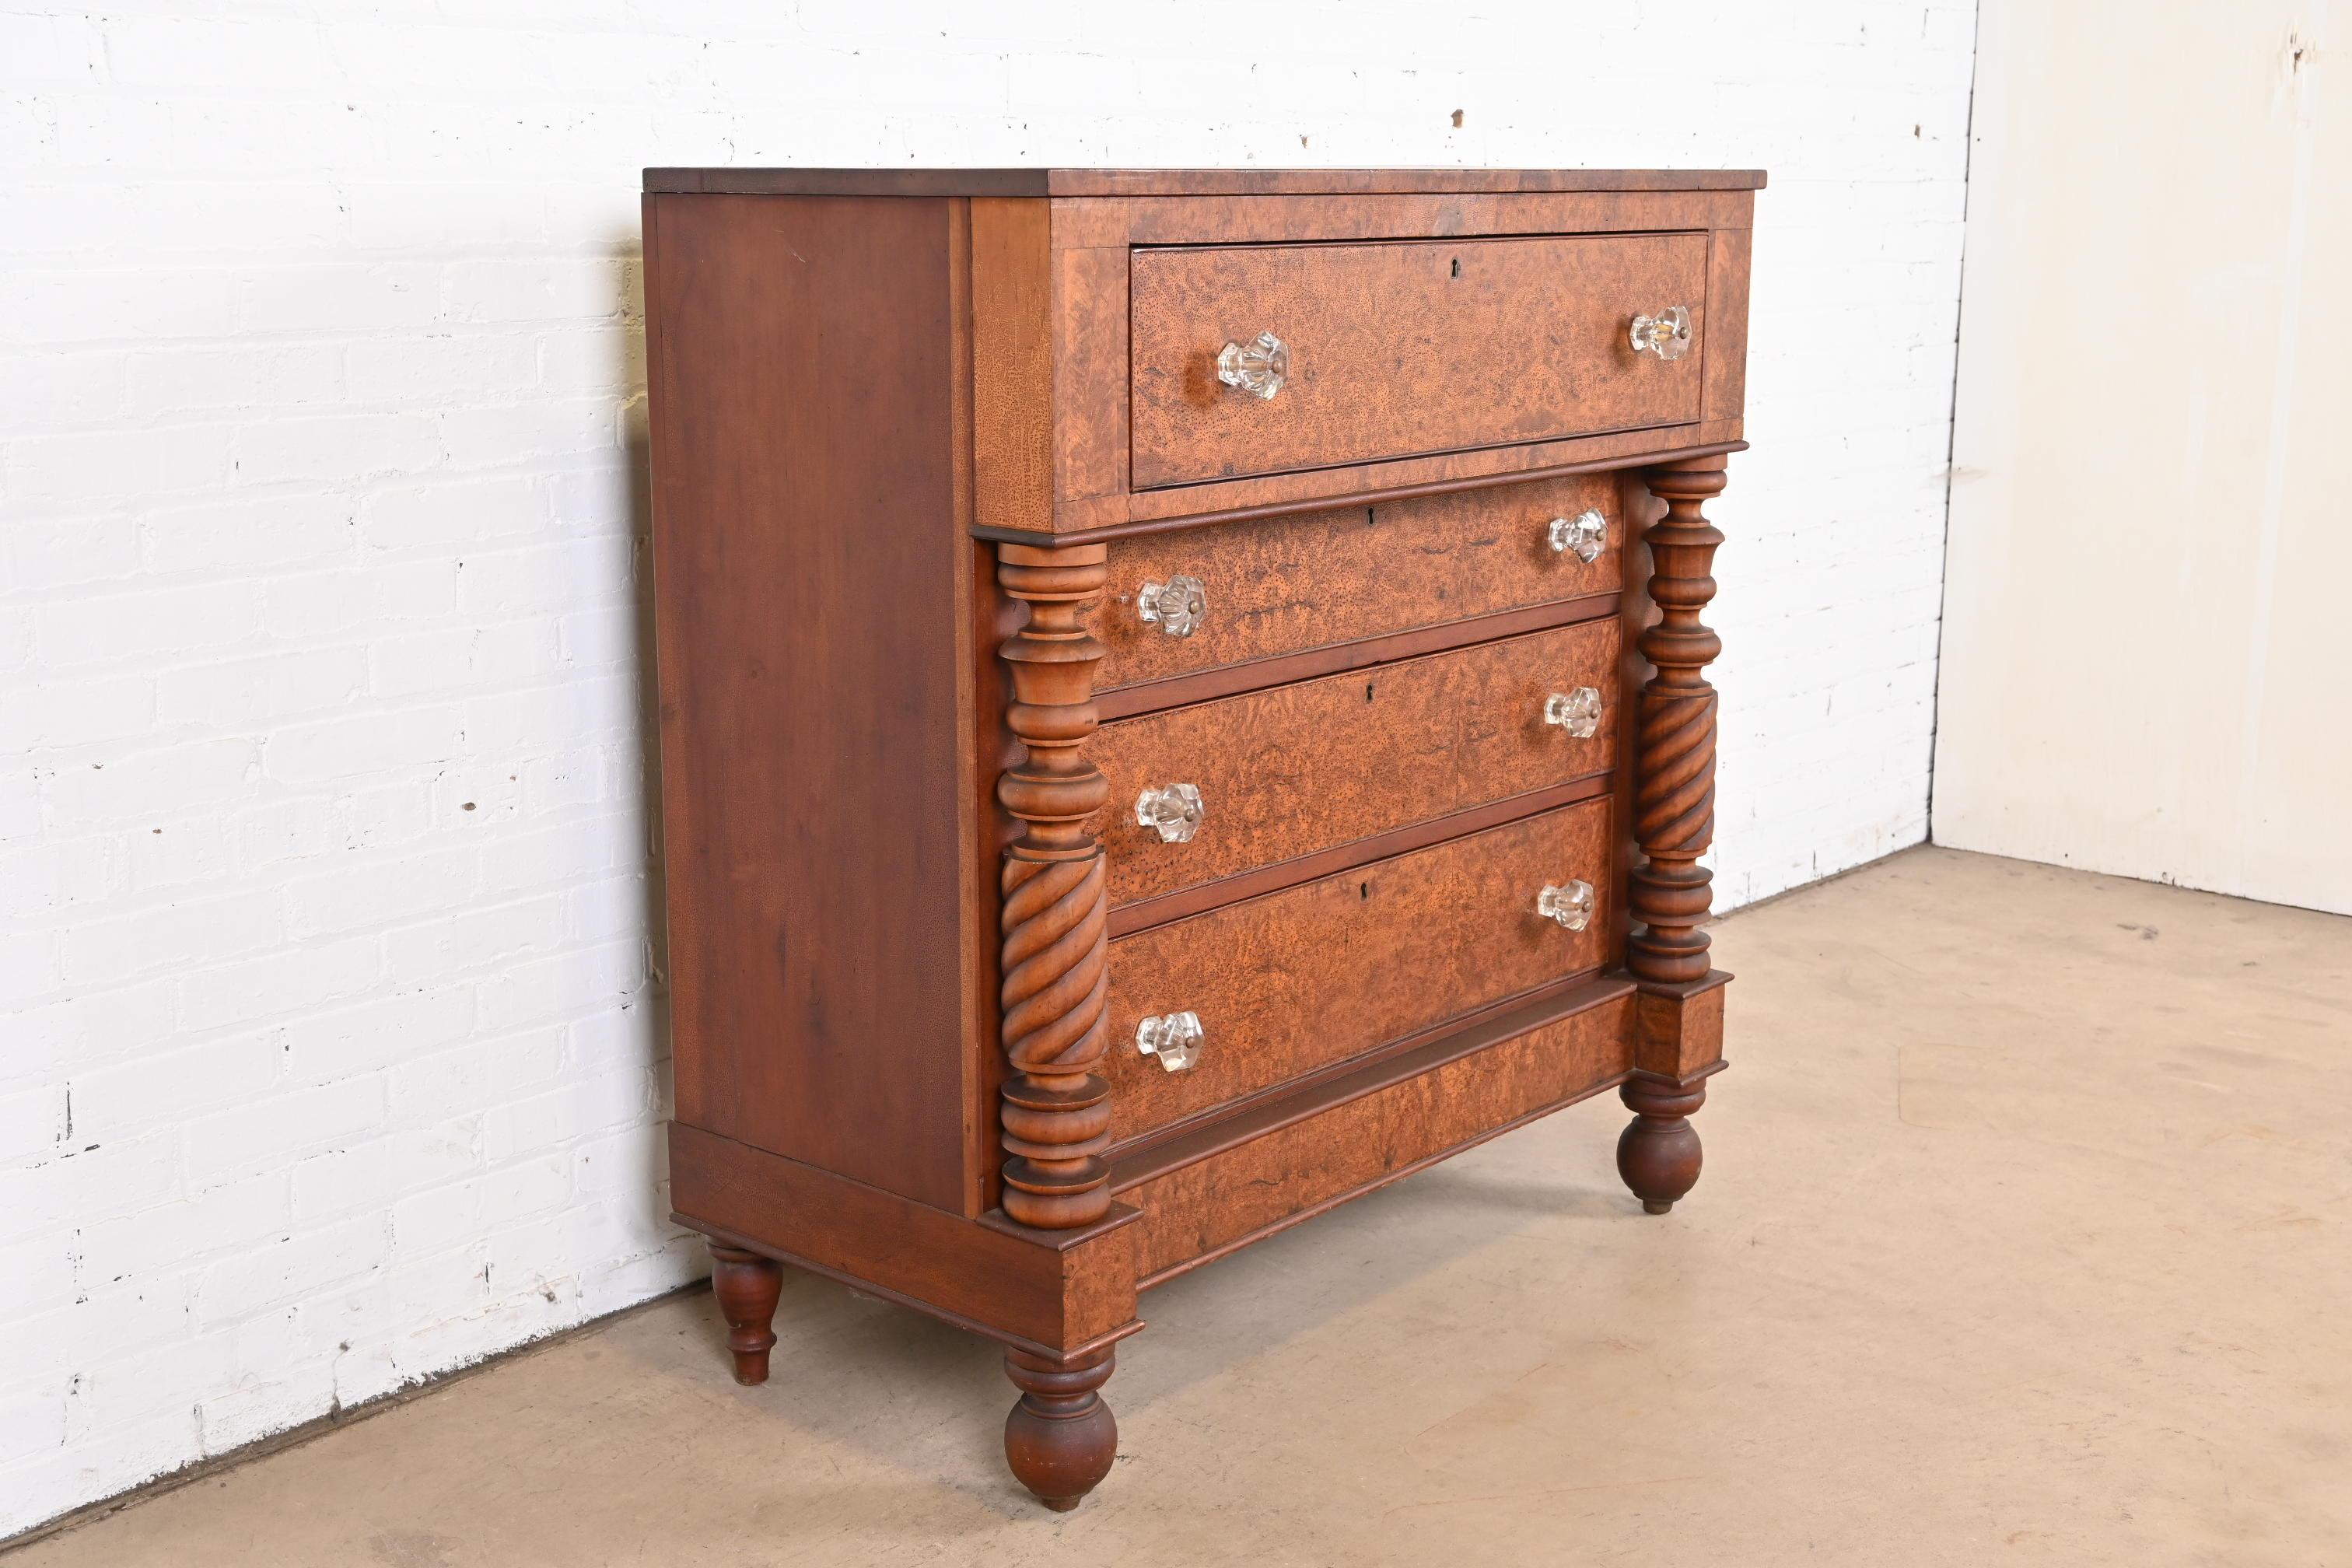 Glass Antique American Empire Burled Mahogany Chest of Drawers, Circa 1820s For Sale